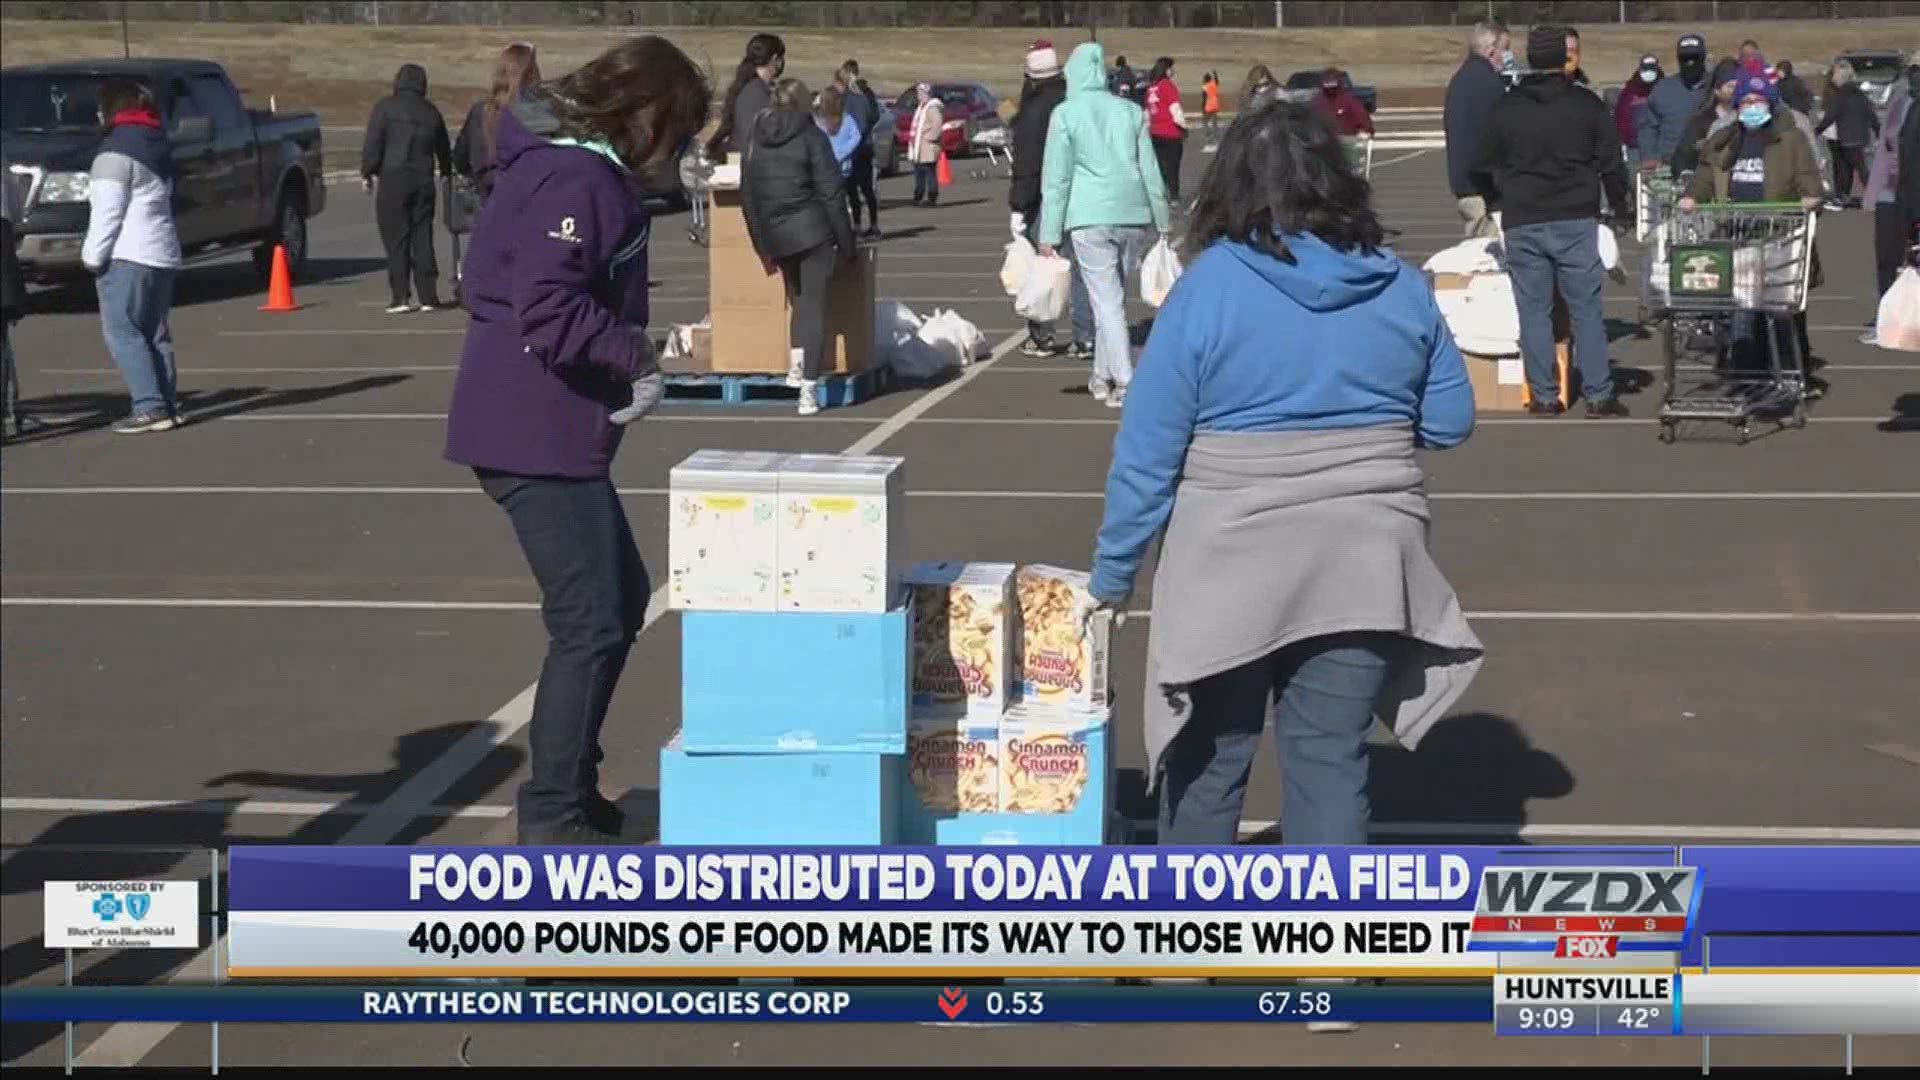 40,000 pounds of free groceries were given away to people in need.